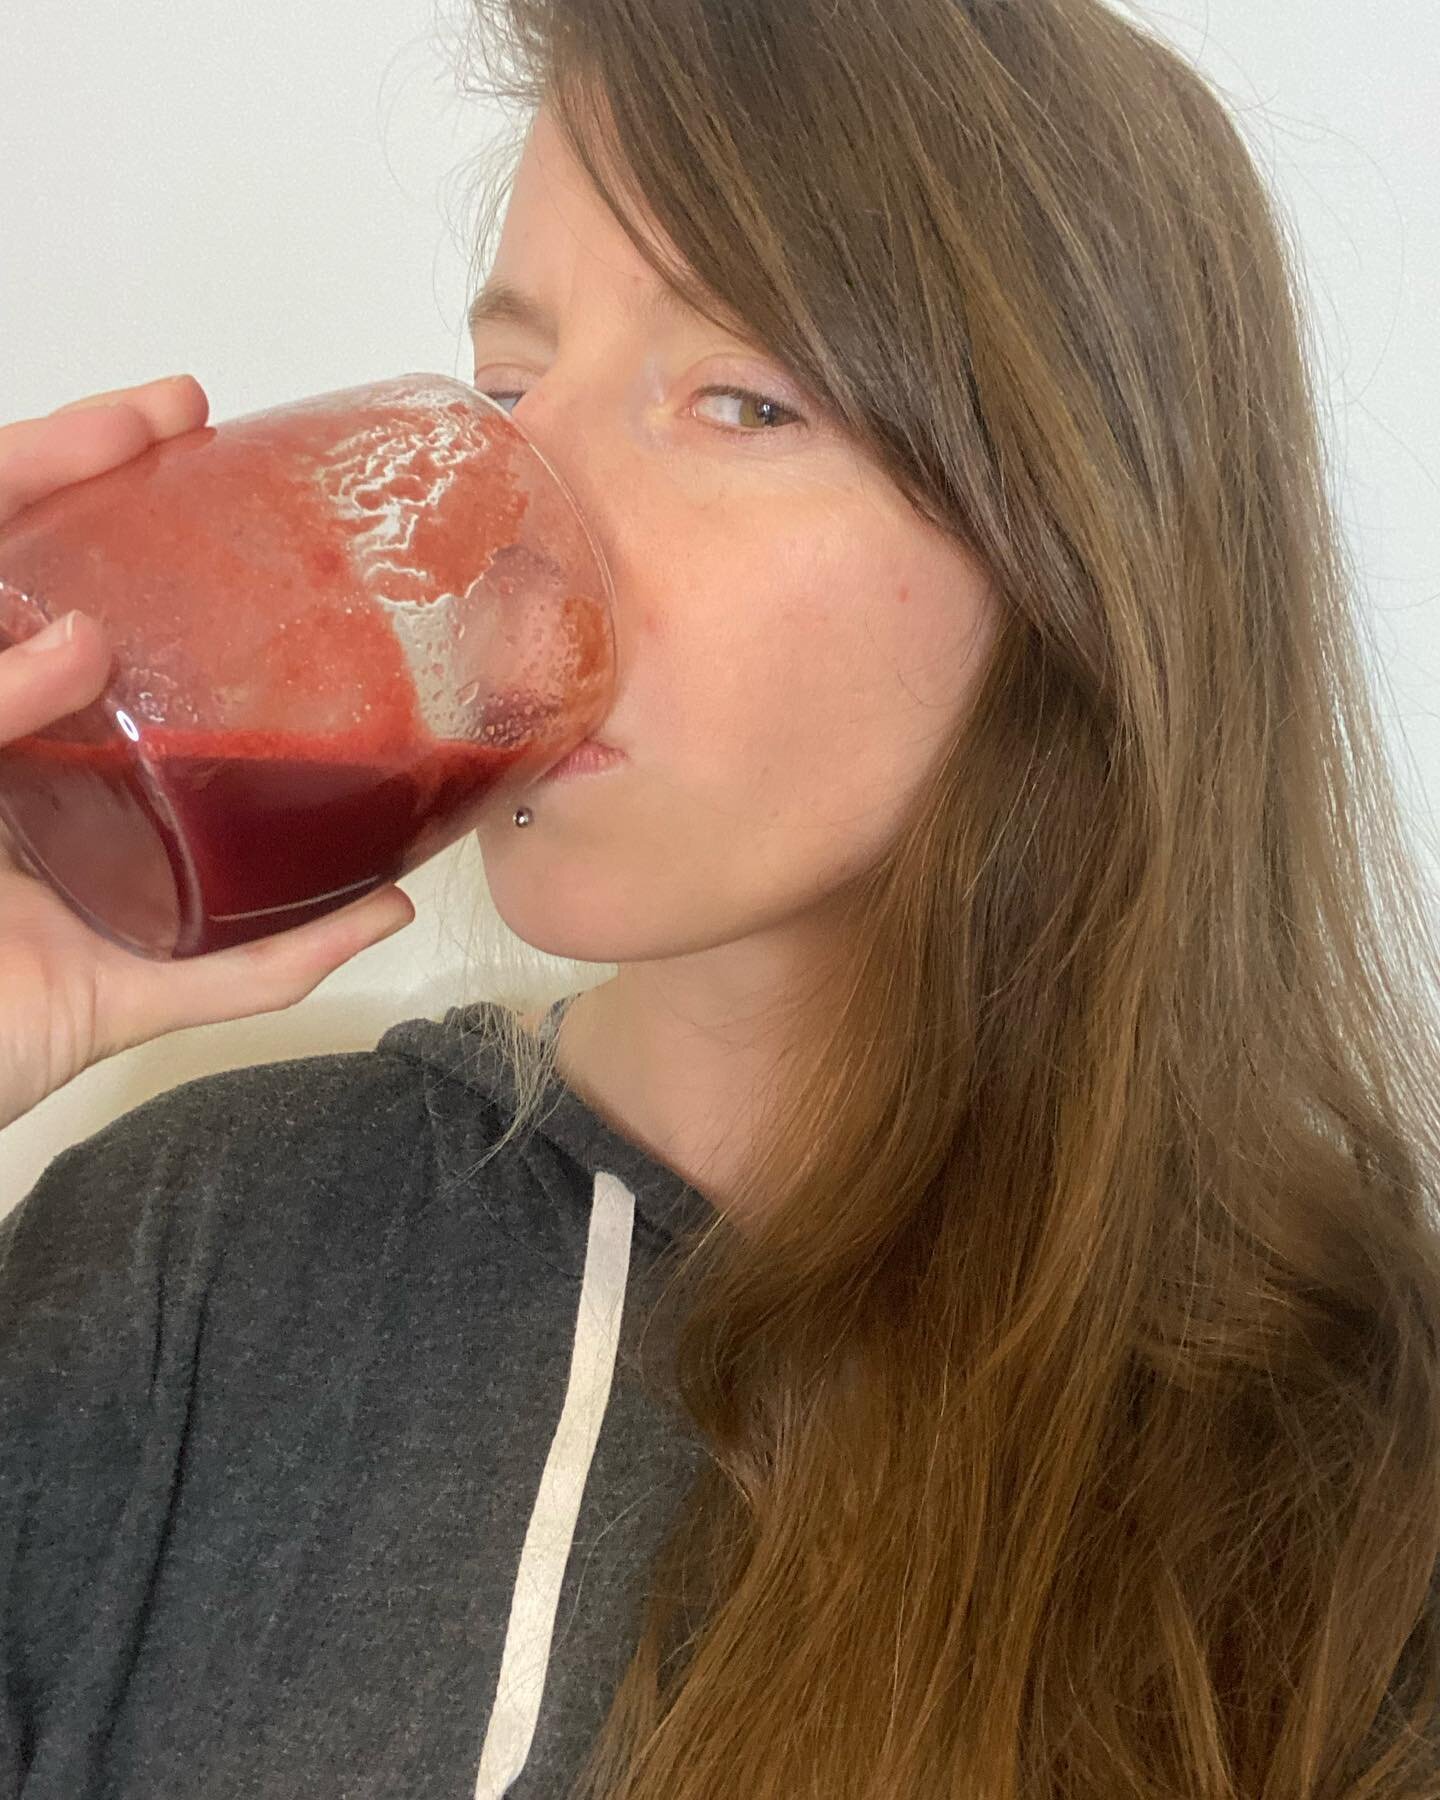 Fact, bears eat beets. Bears, beets, Battlestar Galactica.
🤪
Been busy as hell the past few weeks. I got two massages last week for maintenance, and now I get to circle back on nourishing my insides this week. 
[Nourishment in my cup: Beet. Cucumber